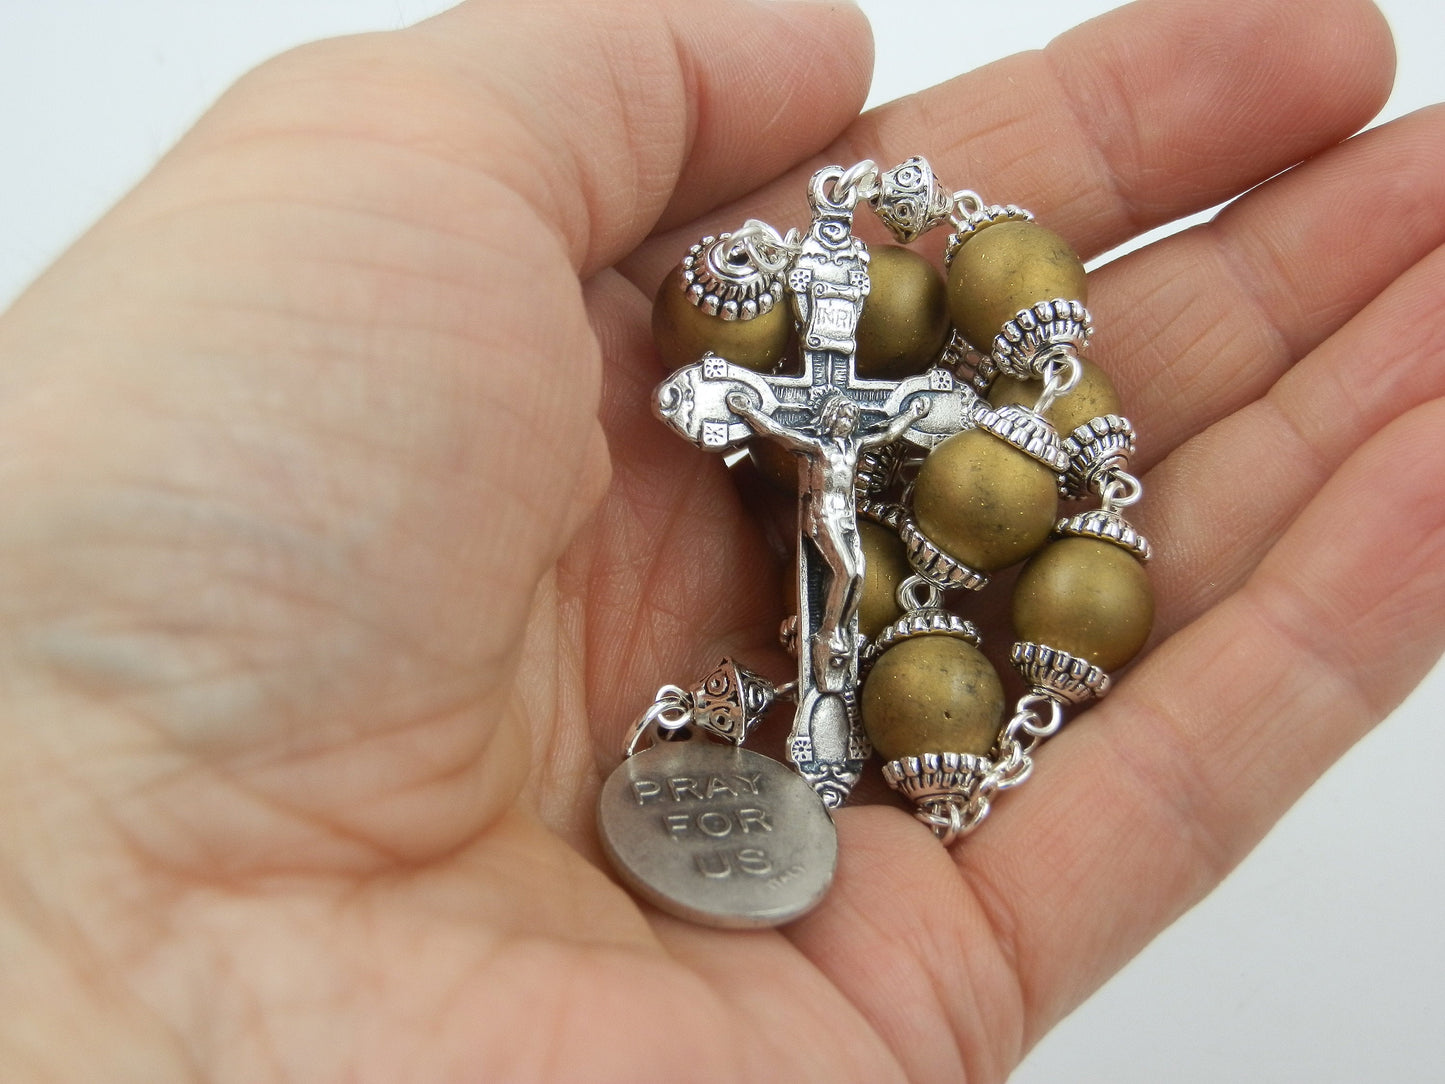 Saint Lucy Handcrafted prayer chaplet, Rosary prayer chaplet, Patron Saints medal prayer beads, Immaculate Heart of Mary, rosaries.